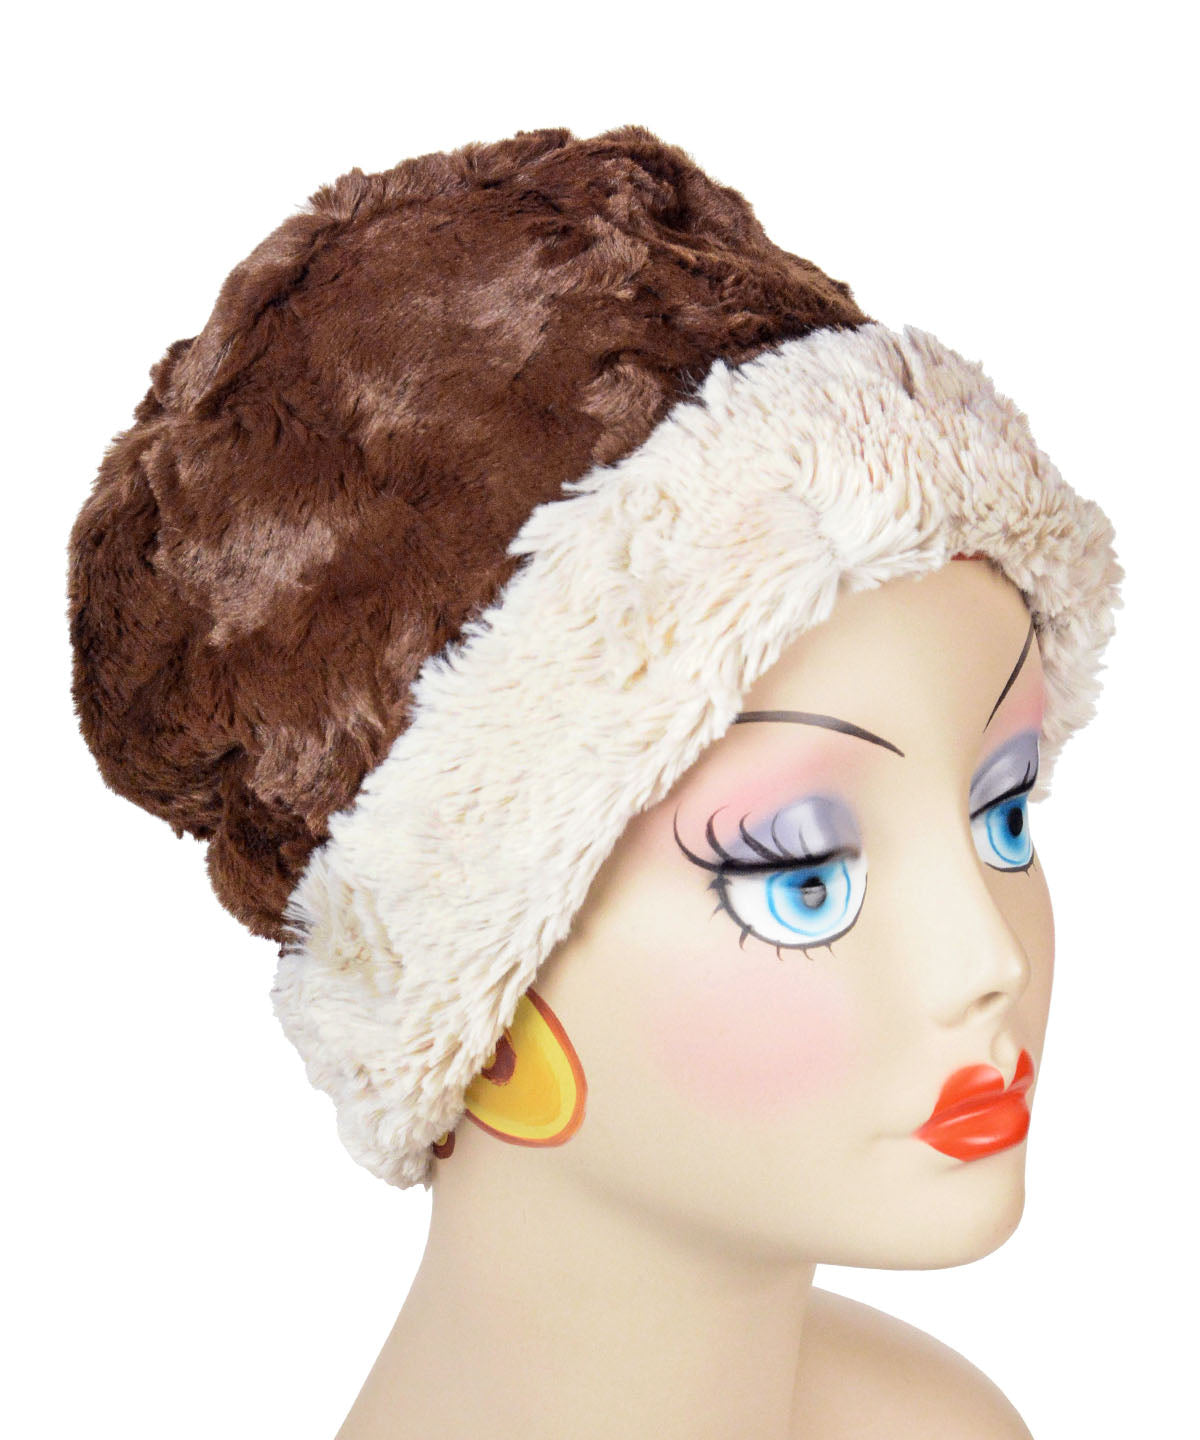 Reversible, Cuffed Pillbox in Cuddly Chocolate with Cuddly Sand Faux Fur by Pandemonium Millinery. Handmade in Seattle, WA USA.